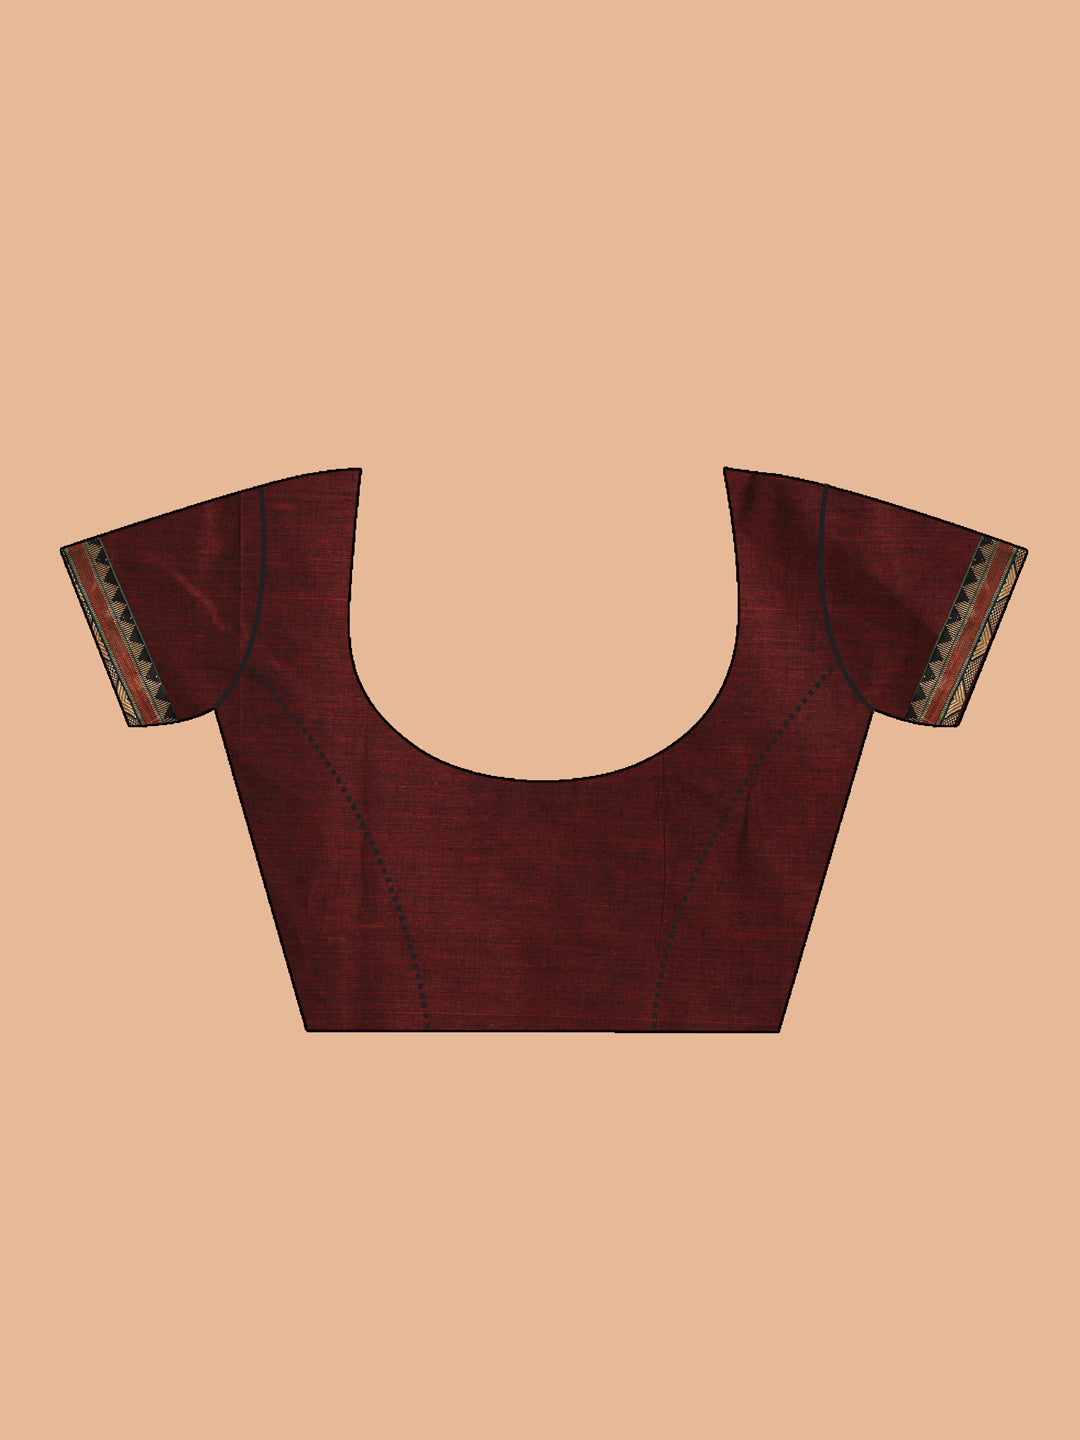 Indethnic Brown Pure Cotton Solid Saree - Blouse Piece View